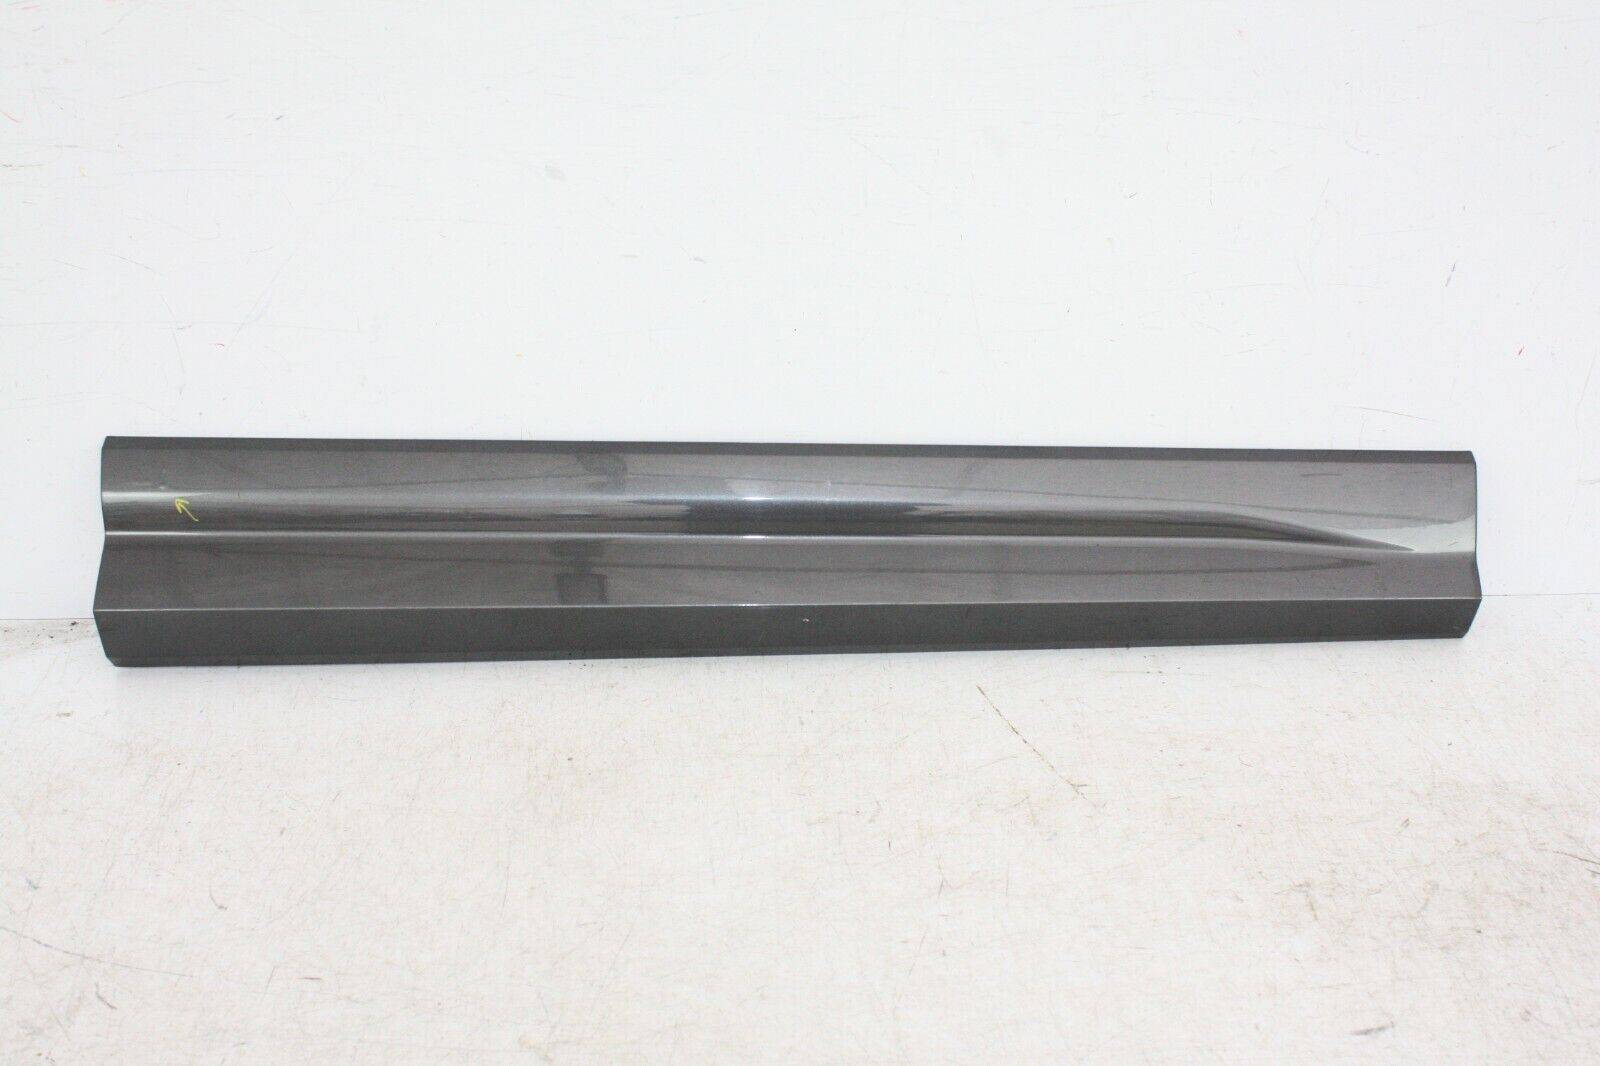 Audi-Q2-S-Line-Front-Right-Door-Moulding-2016-ON-81A853960A-Genuine-176474537085